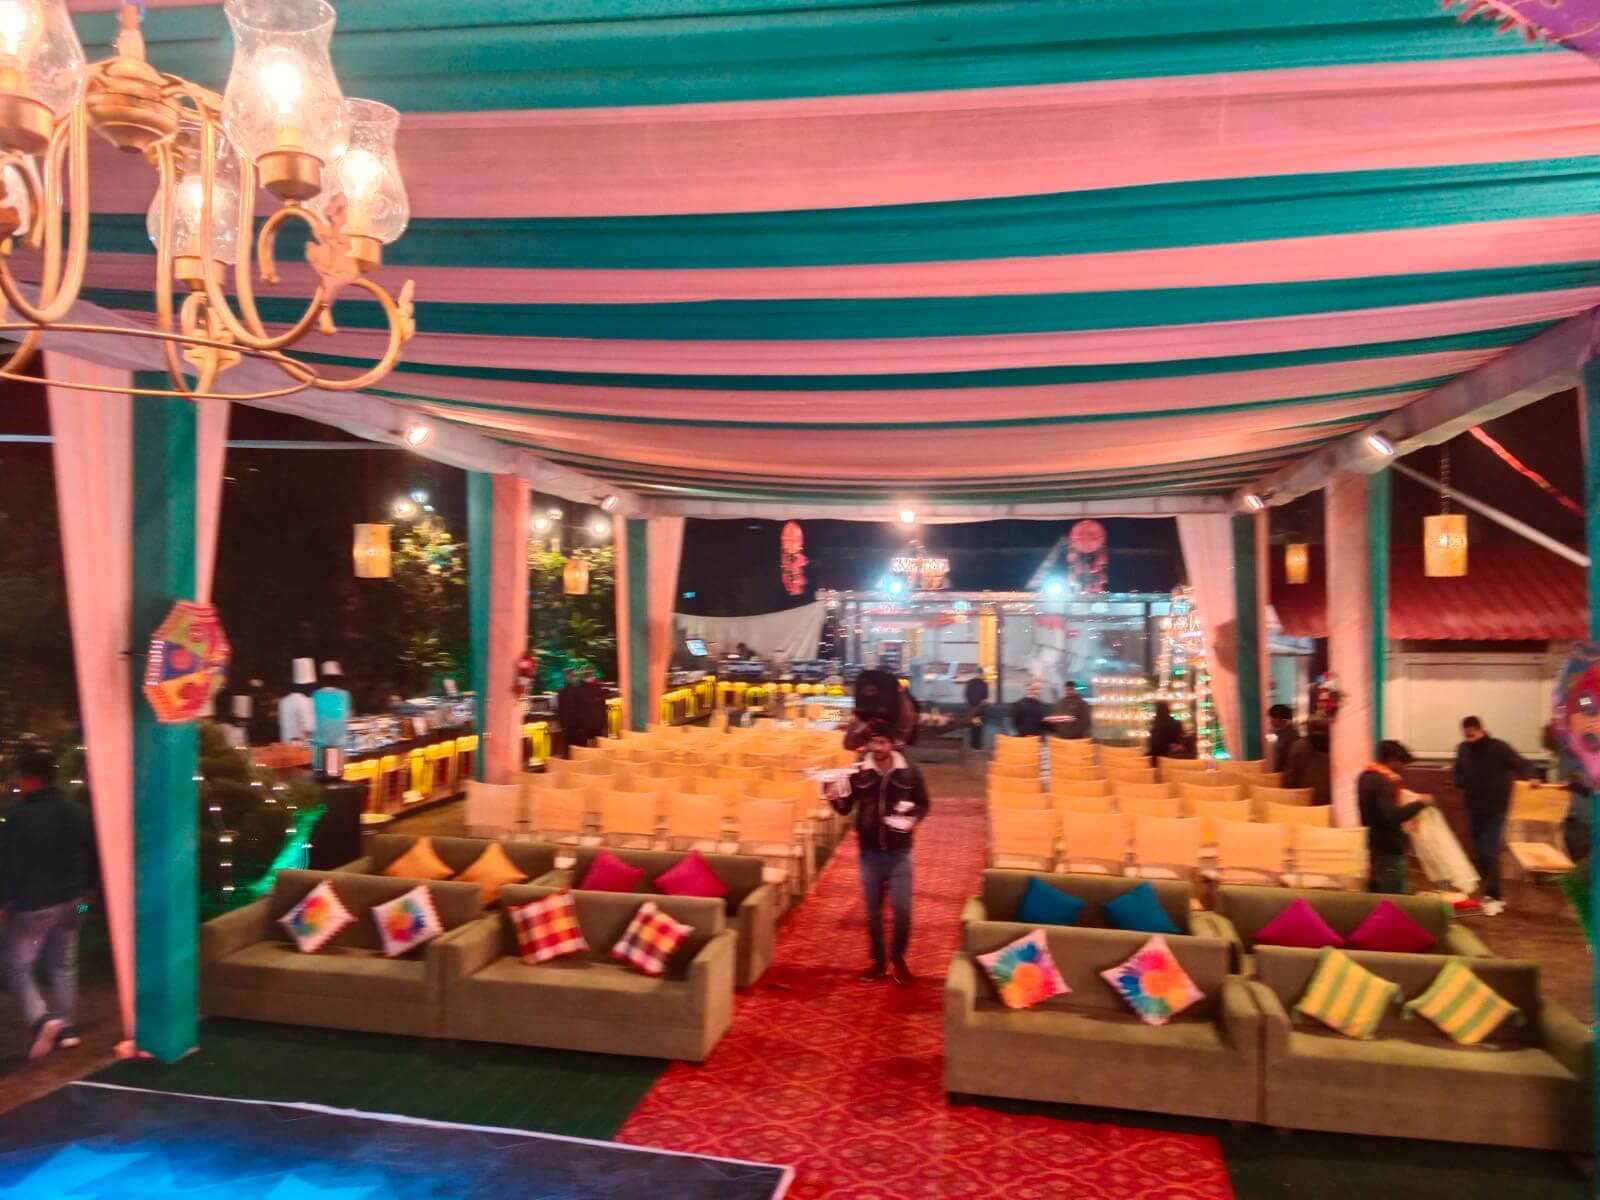 Sumangalam Events Event Services | Wedding Planner